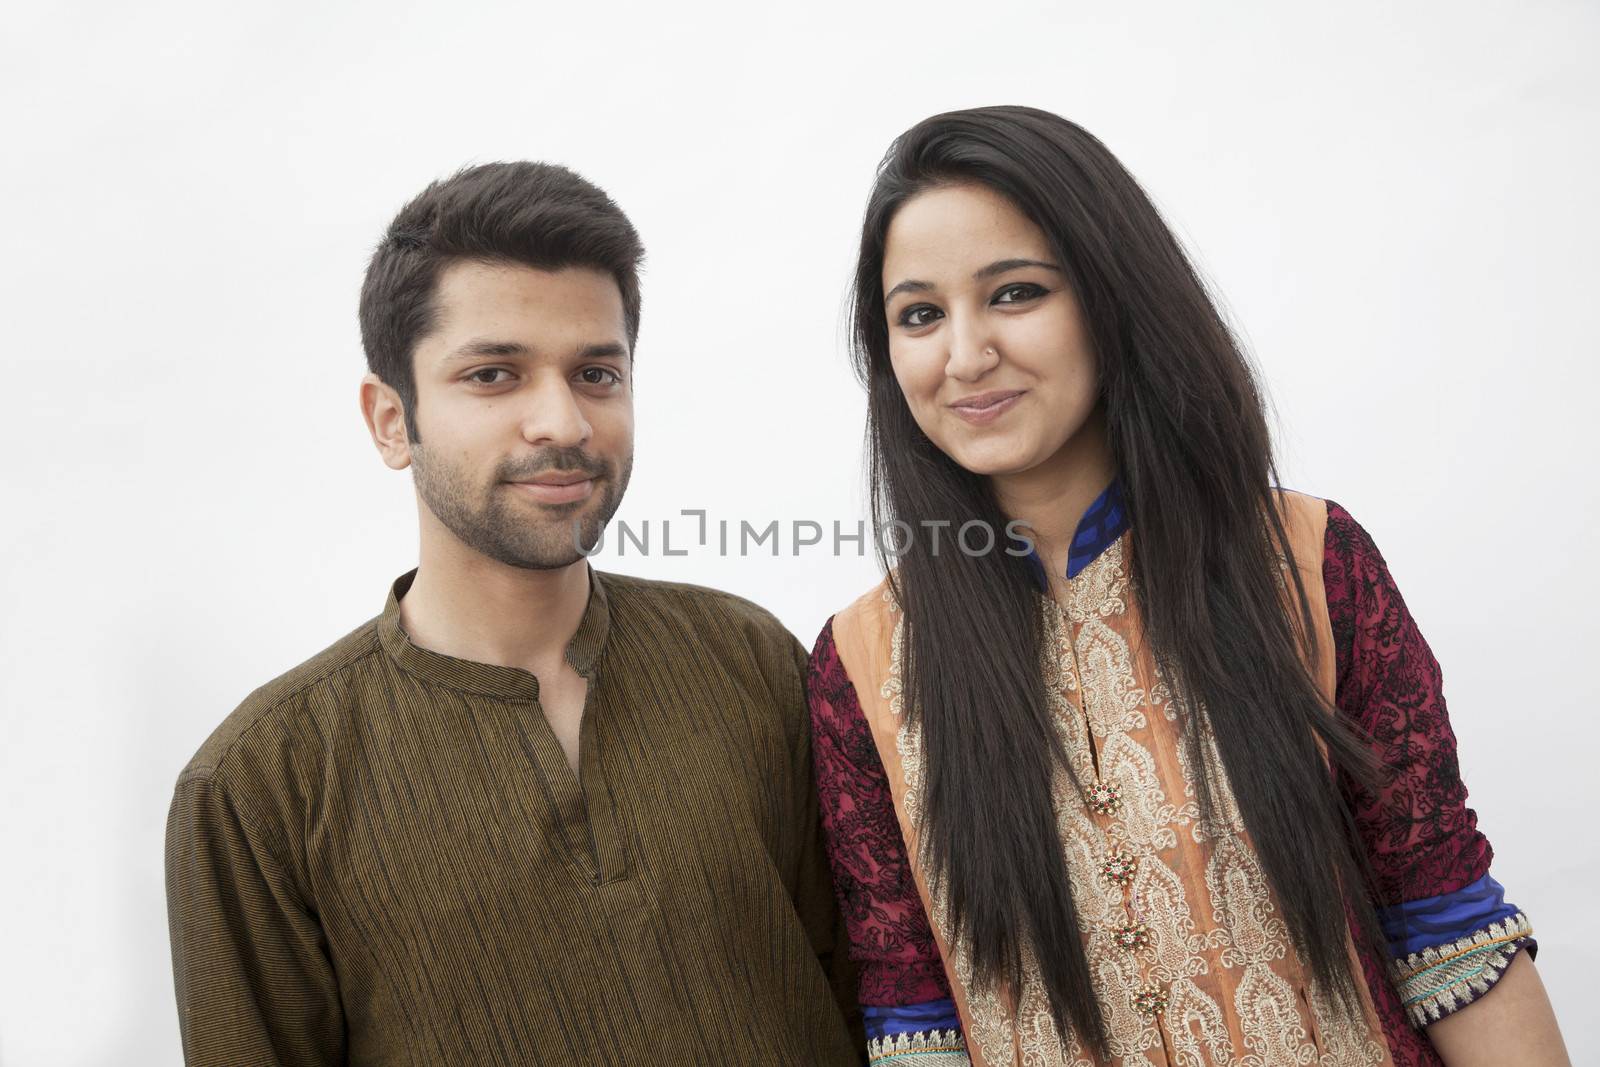 Portrait of smiling young couple wearing traditional clothing from Pakistan, studio shot